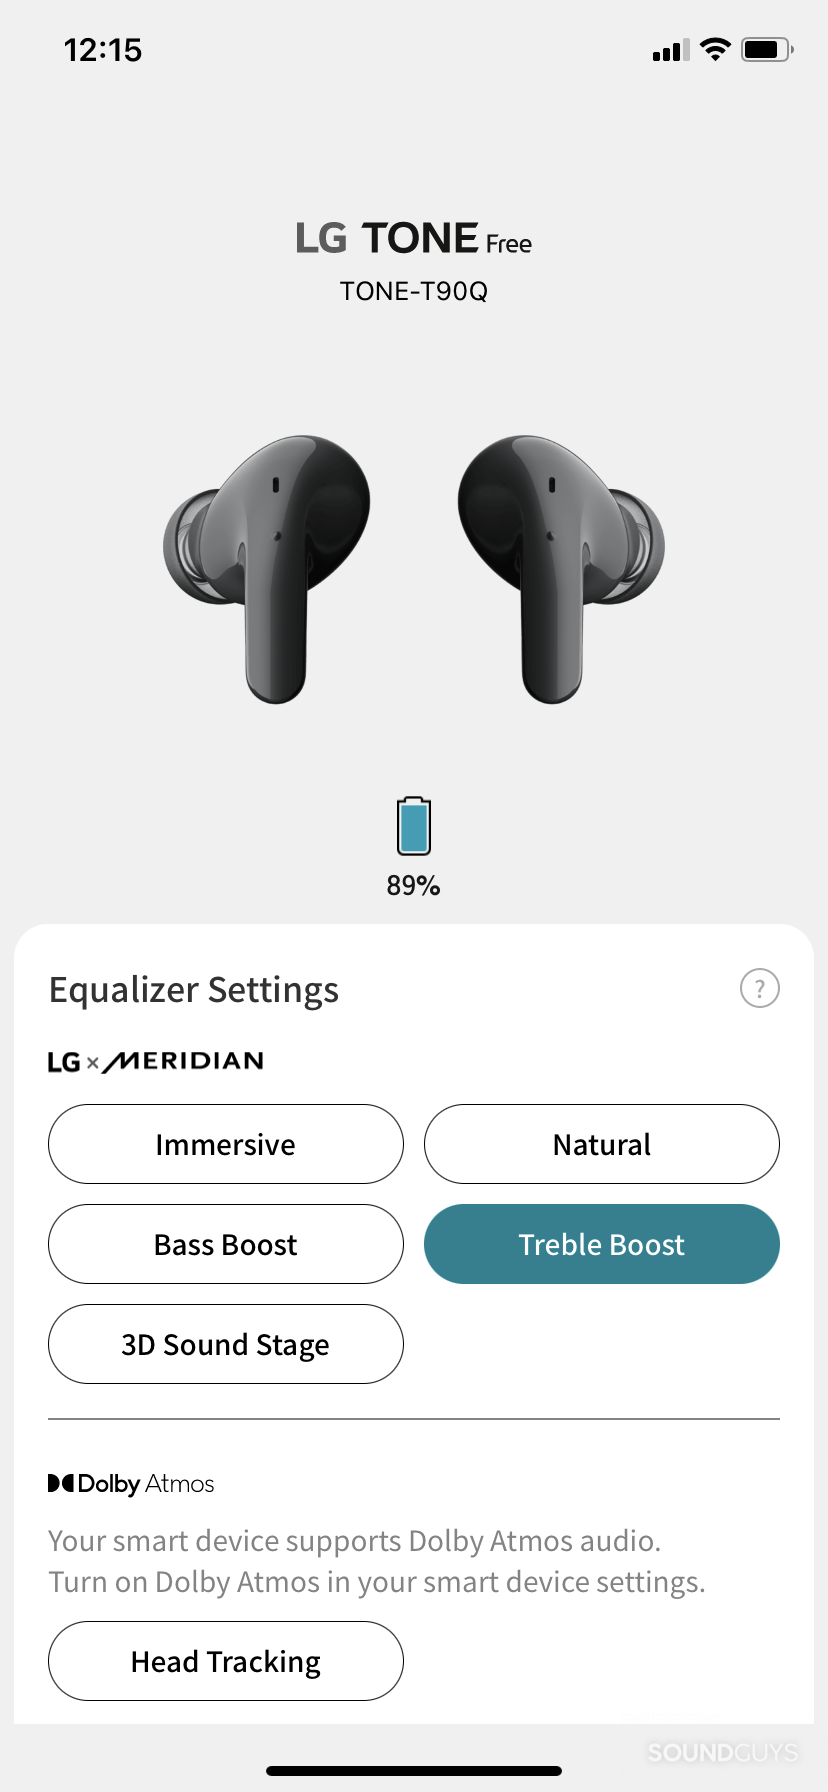 The LG TONE Free app for the LG TONE Free T90, showing the EQ presets and head tracking option..